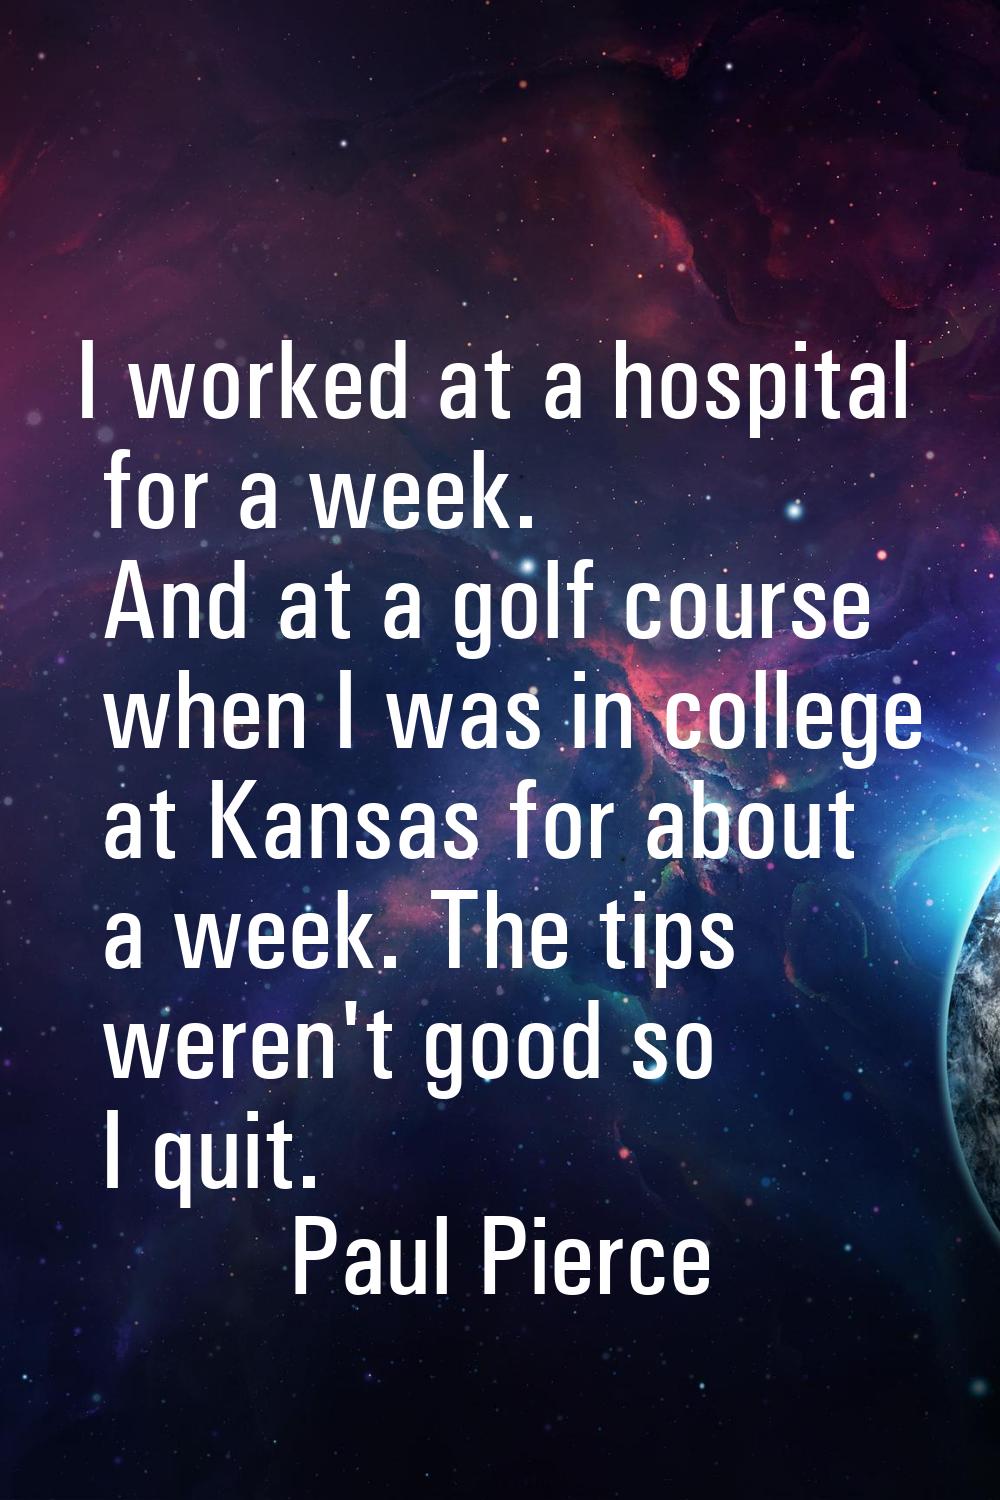 I worked at a hospital for a week. And at a golf course when I was in college at Kansas for about a